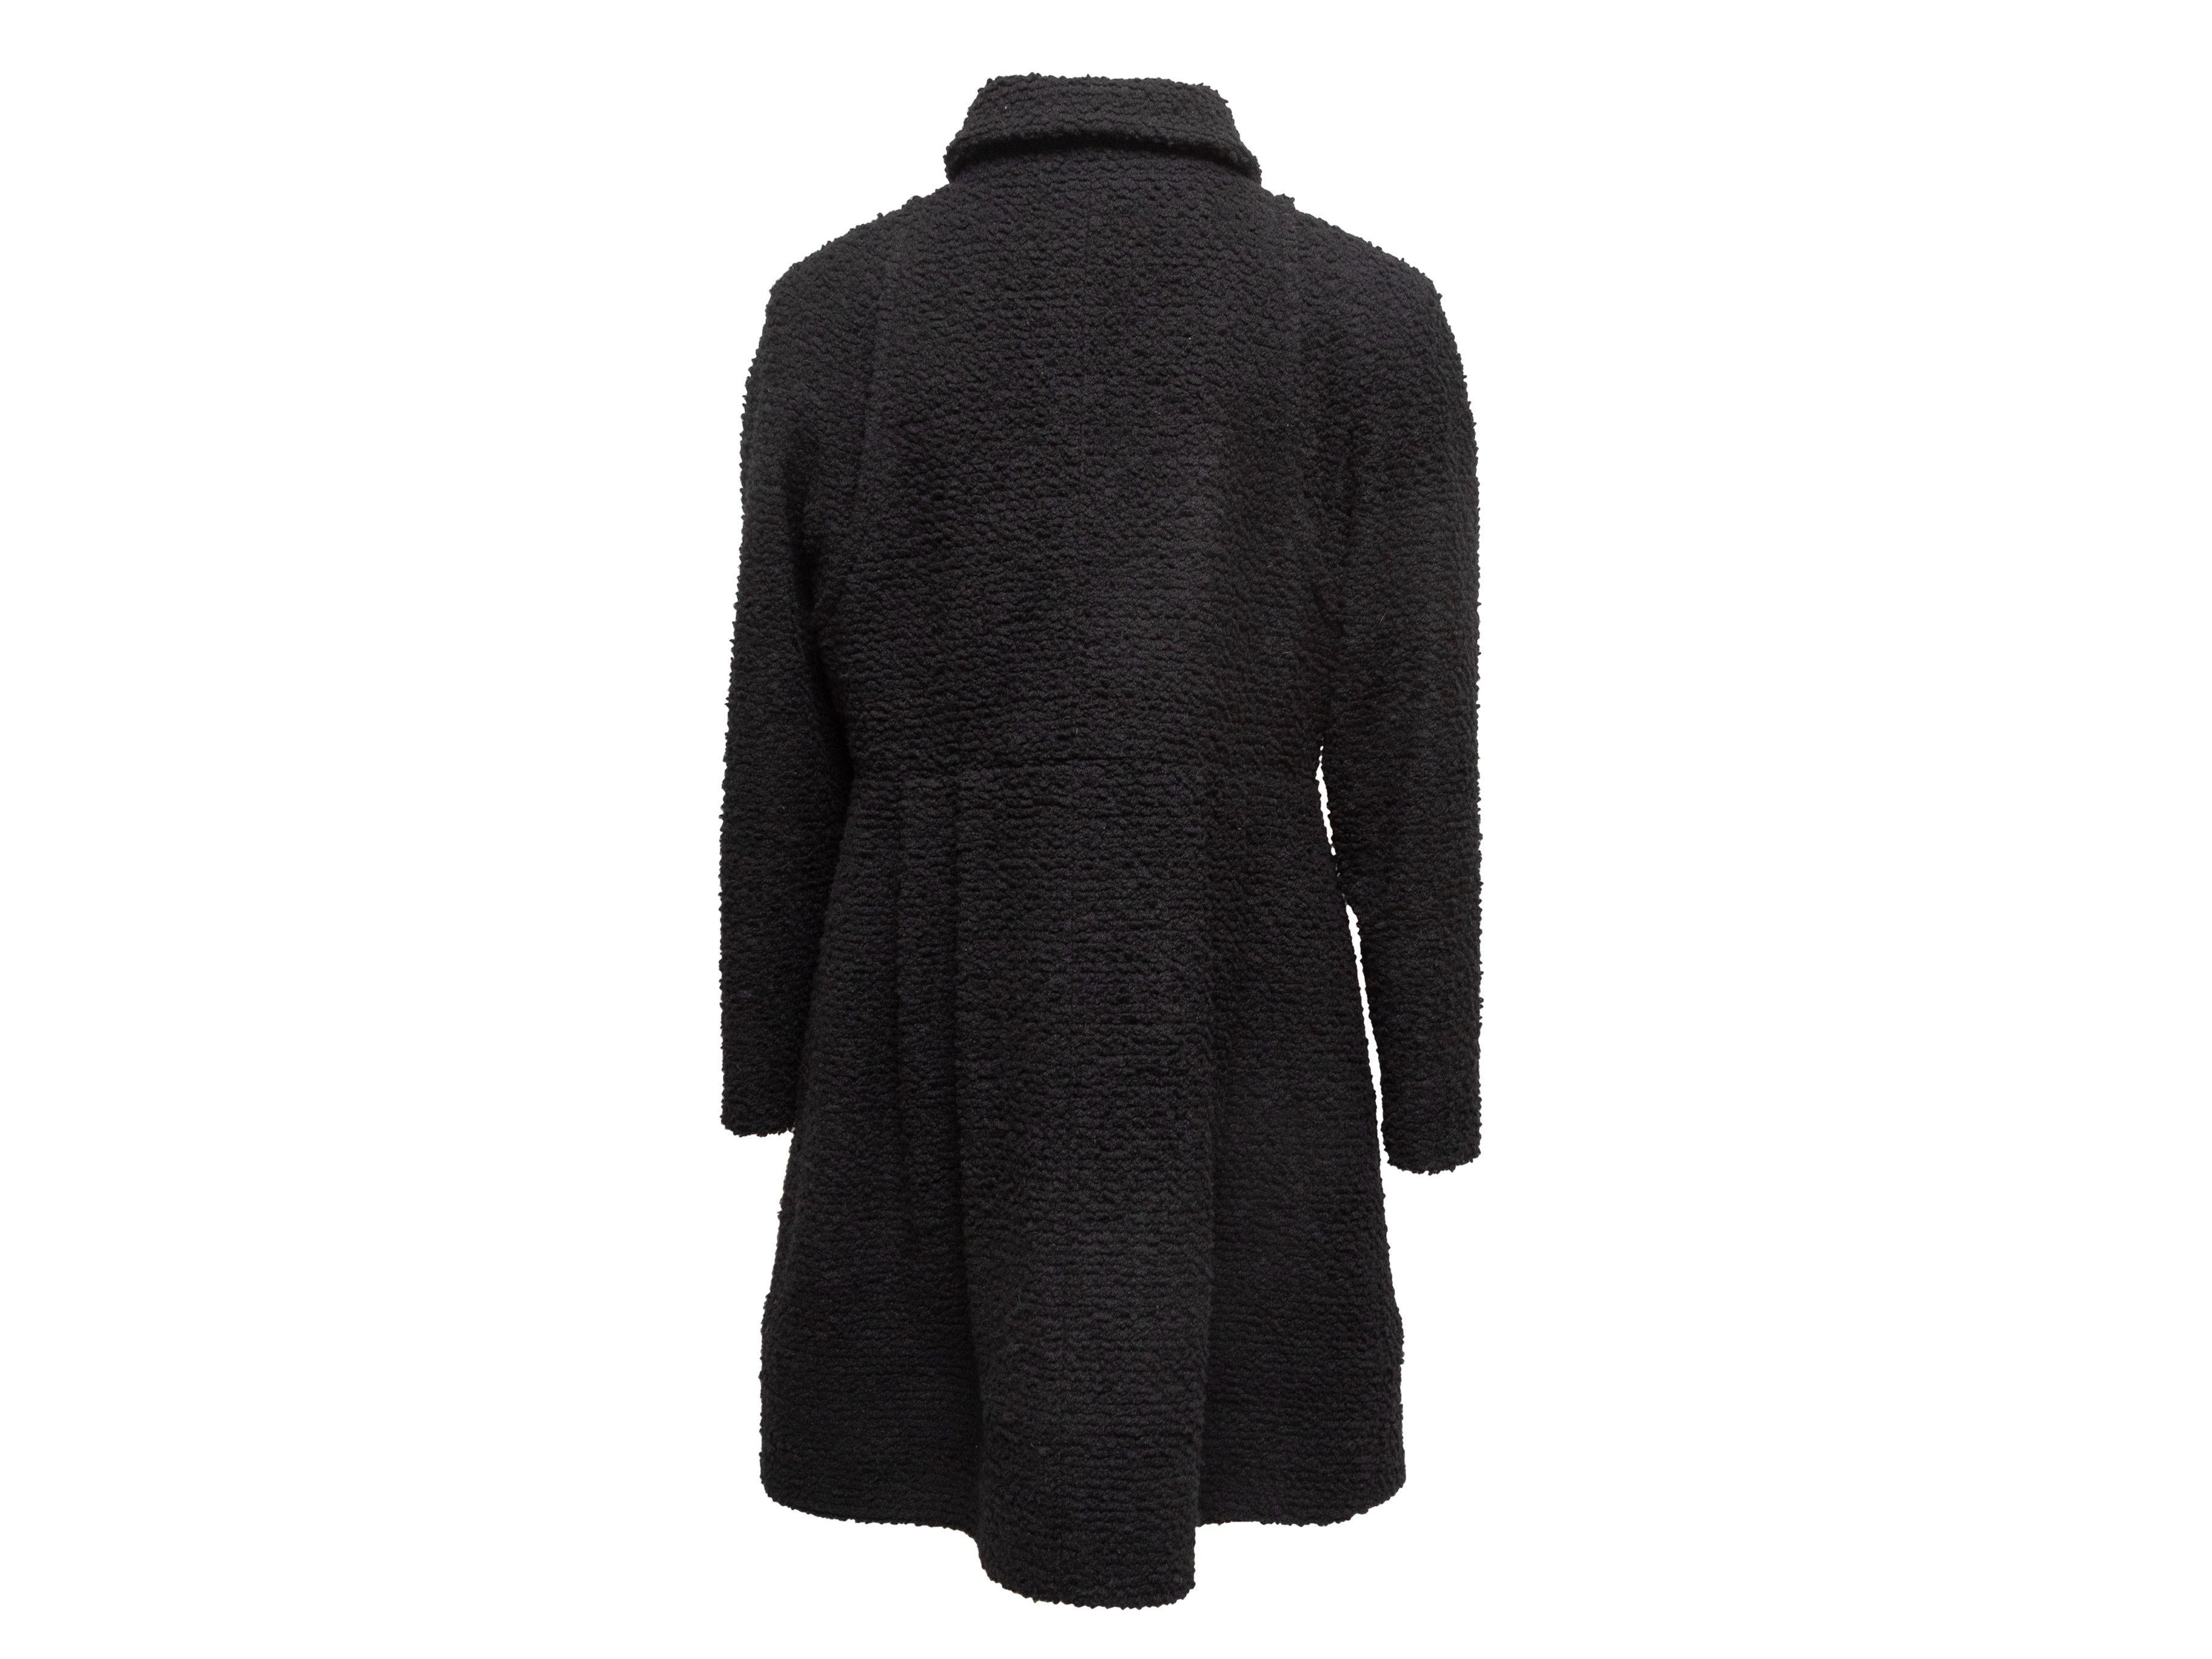 Chanel Black Boucle Wool Double-Breasted Coat 4